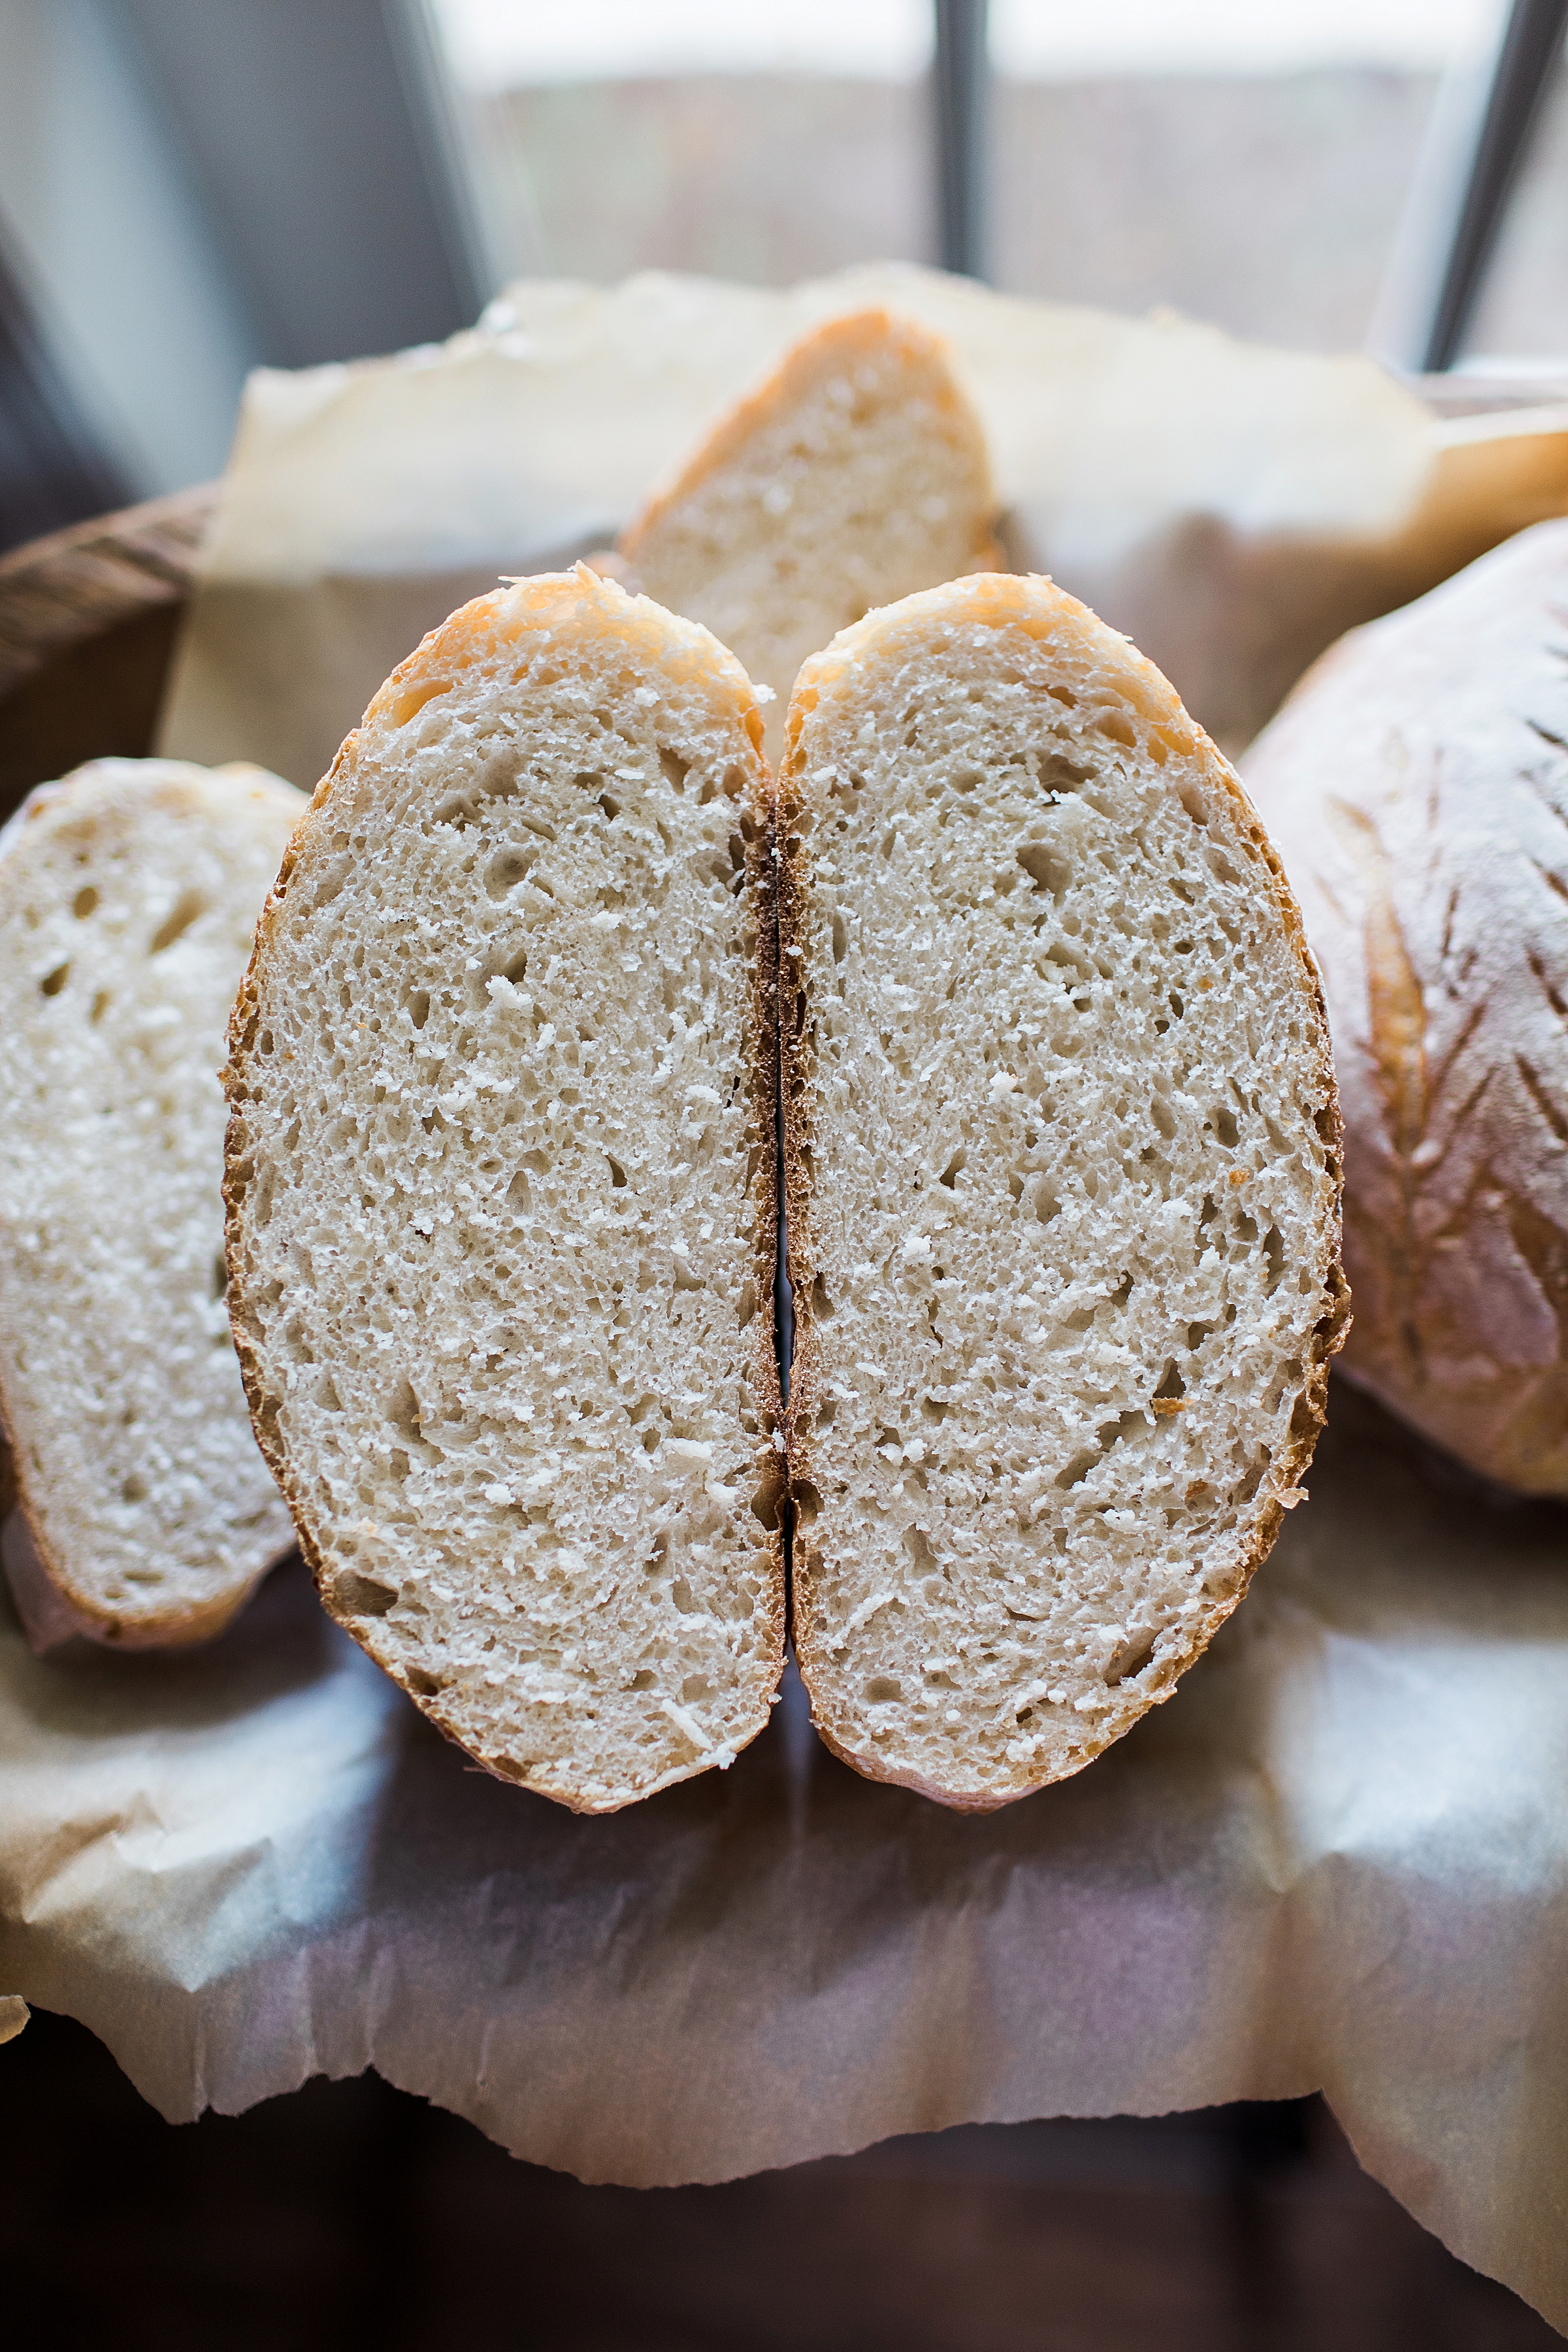 Dry Yeast Crusty Bread That You Can Score